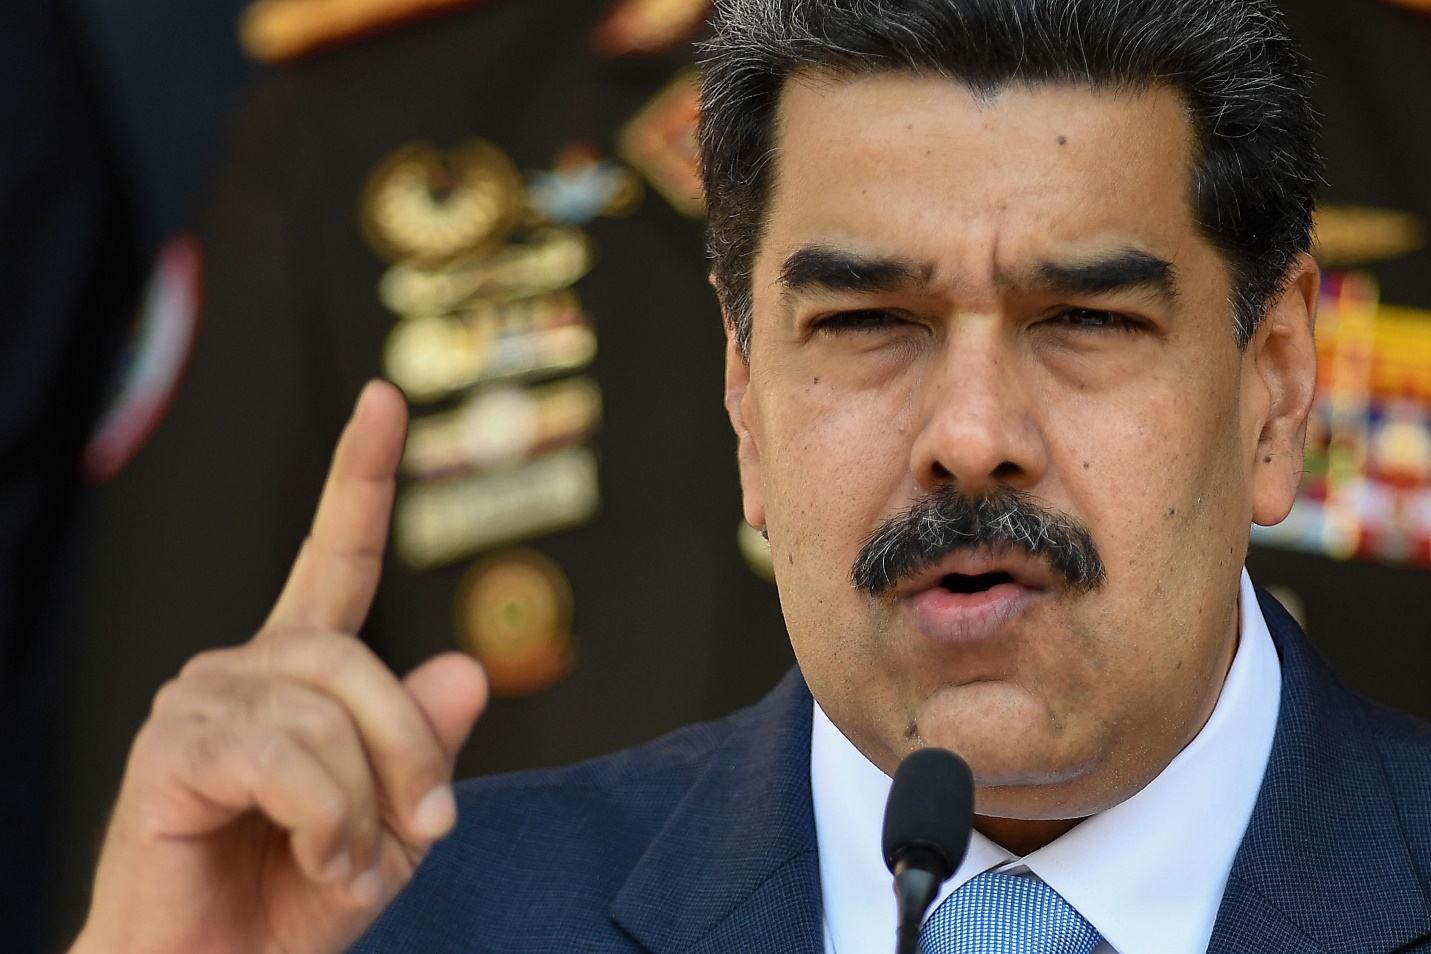 Description: Nicolás Maduro threatens 'racist cowboy' Trump in face of charges